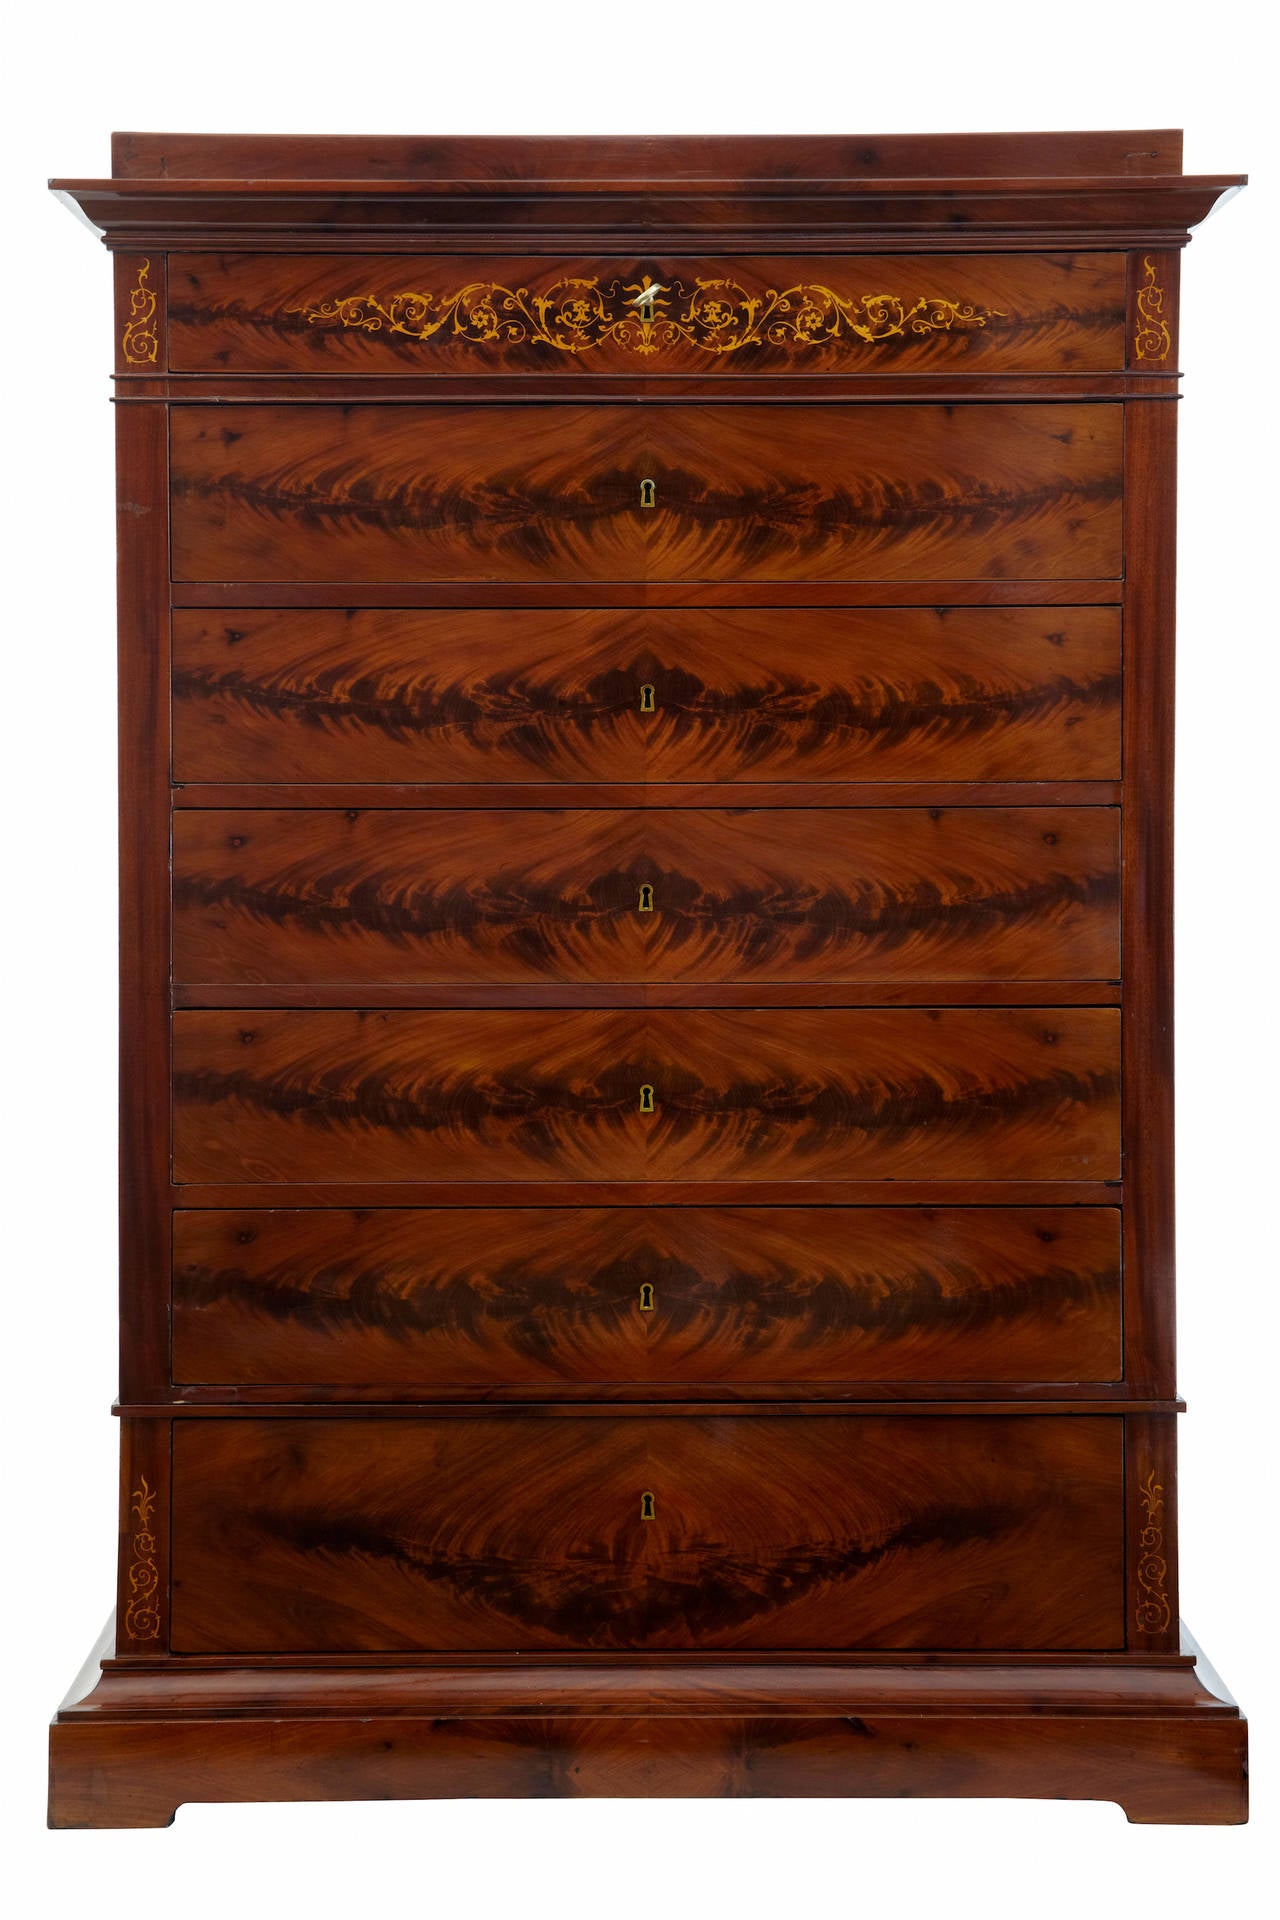 Fine quality Danish chest circa 1850. 2 part chest which splits at the lowest drawer. 7 graduating drawers, the top drawer with floral inlay. Each drawer with lock. Minor veneer repairs to base.

Measures: Height: 58 1/4